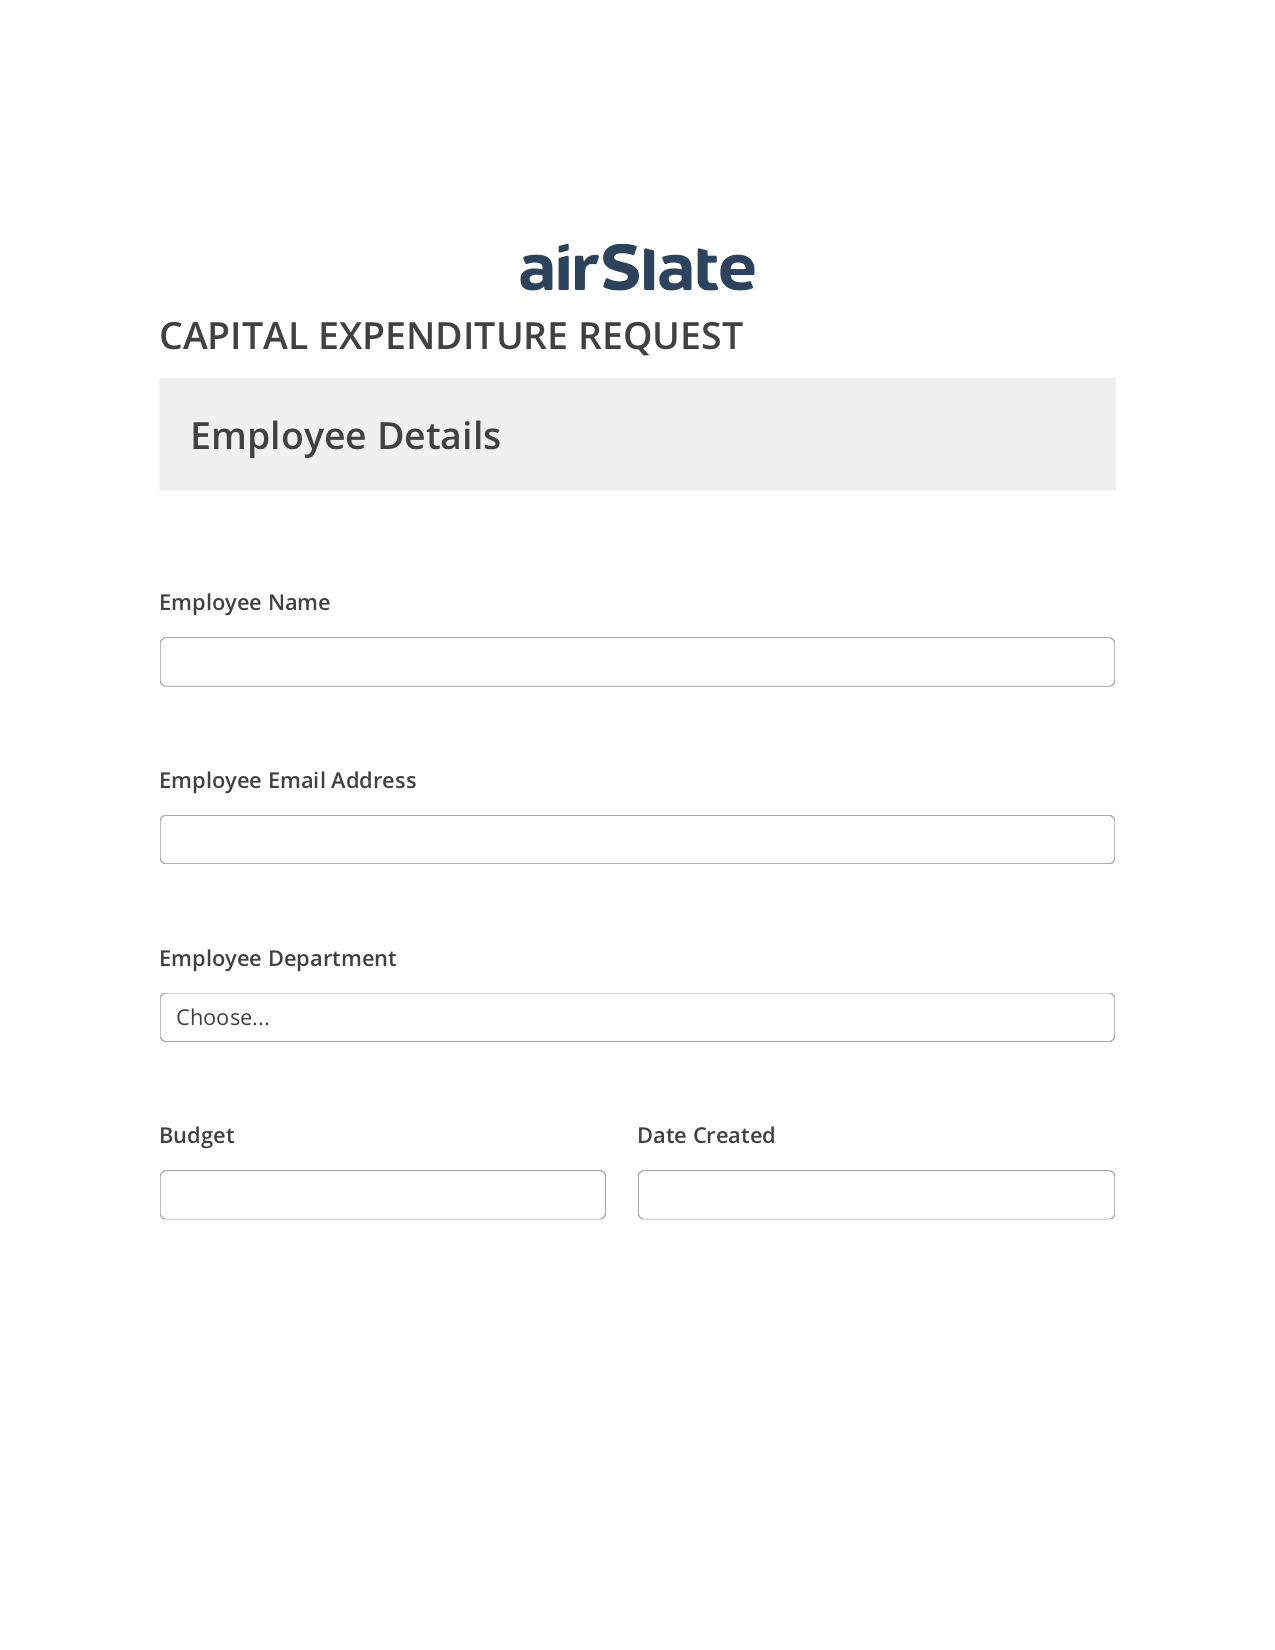 Capital Expenditure Request Approval Workflow Pre-fill Slate from MS Dynamics 365 record, Mailchimp send Campaign bot, Slack Two-Way Binding Bot